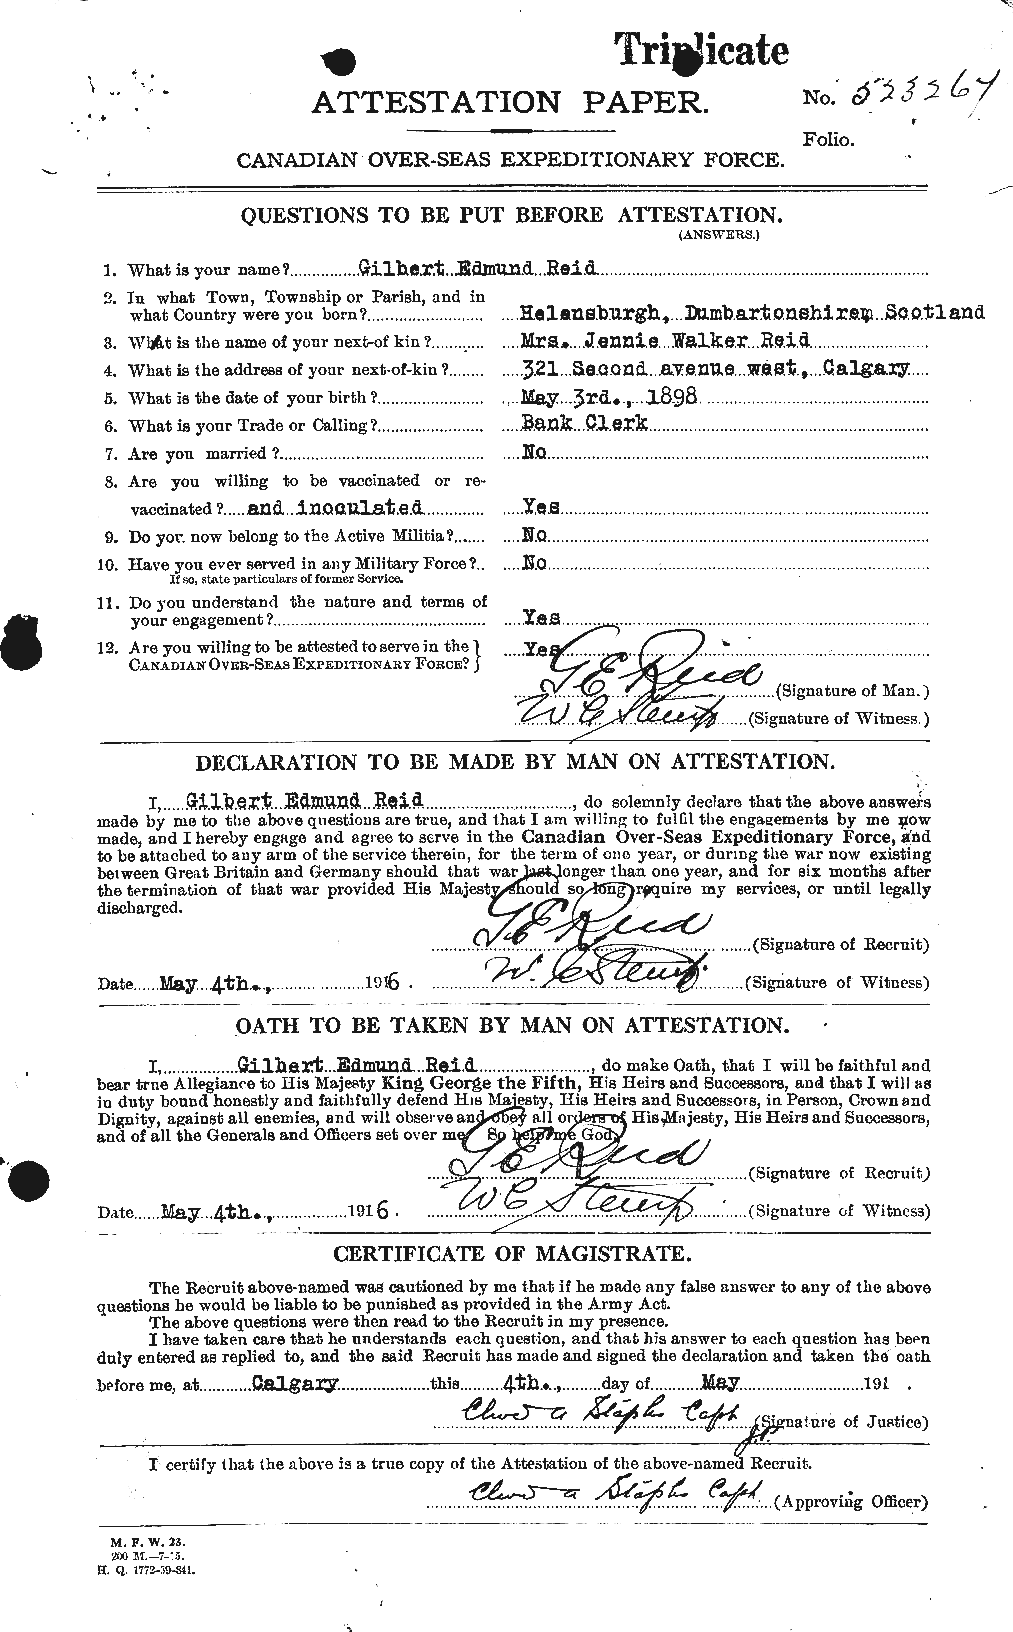 Personnel Records of the First World War - CEF 598553a